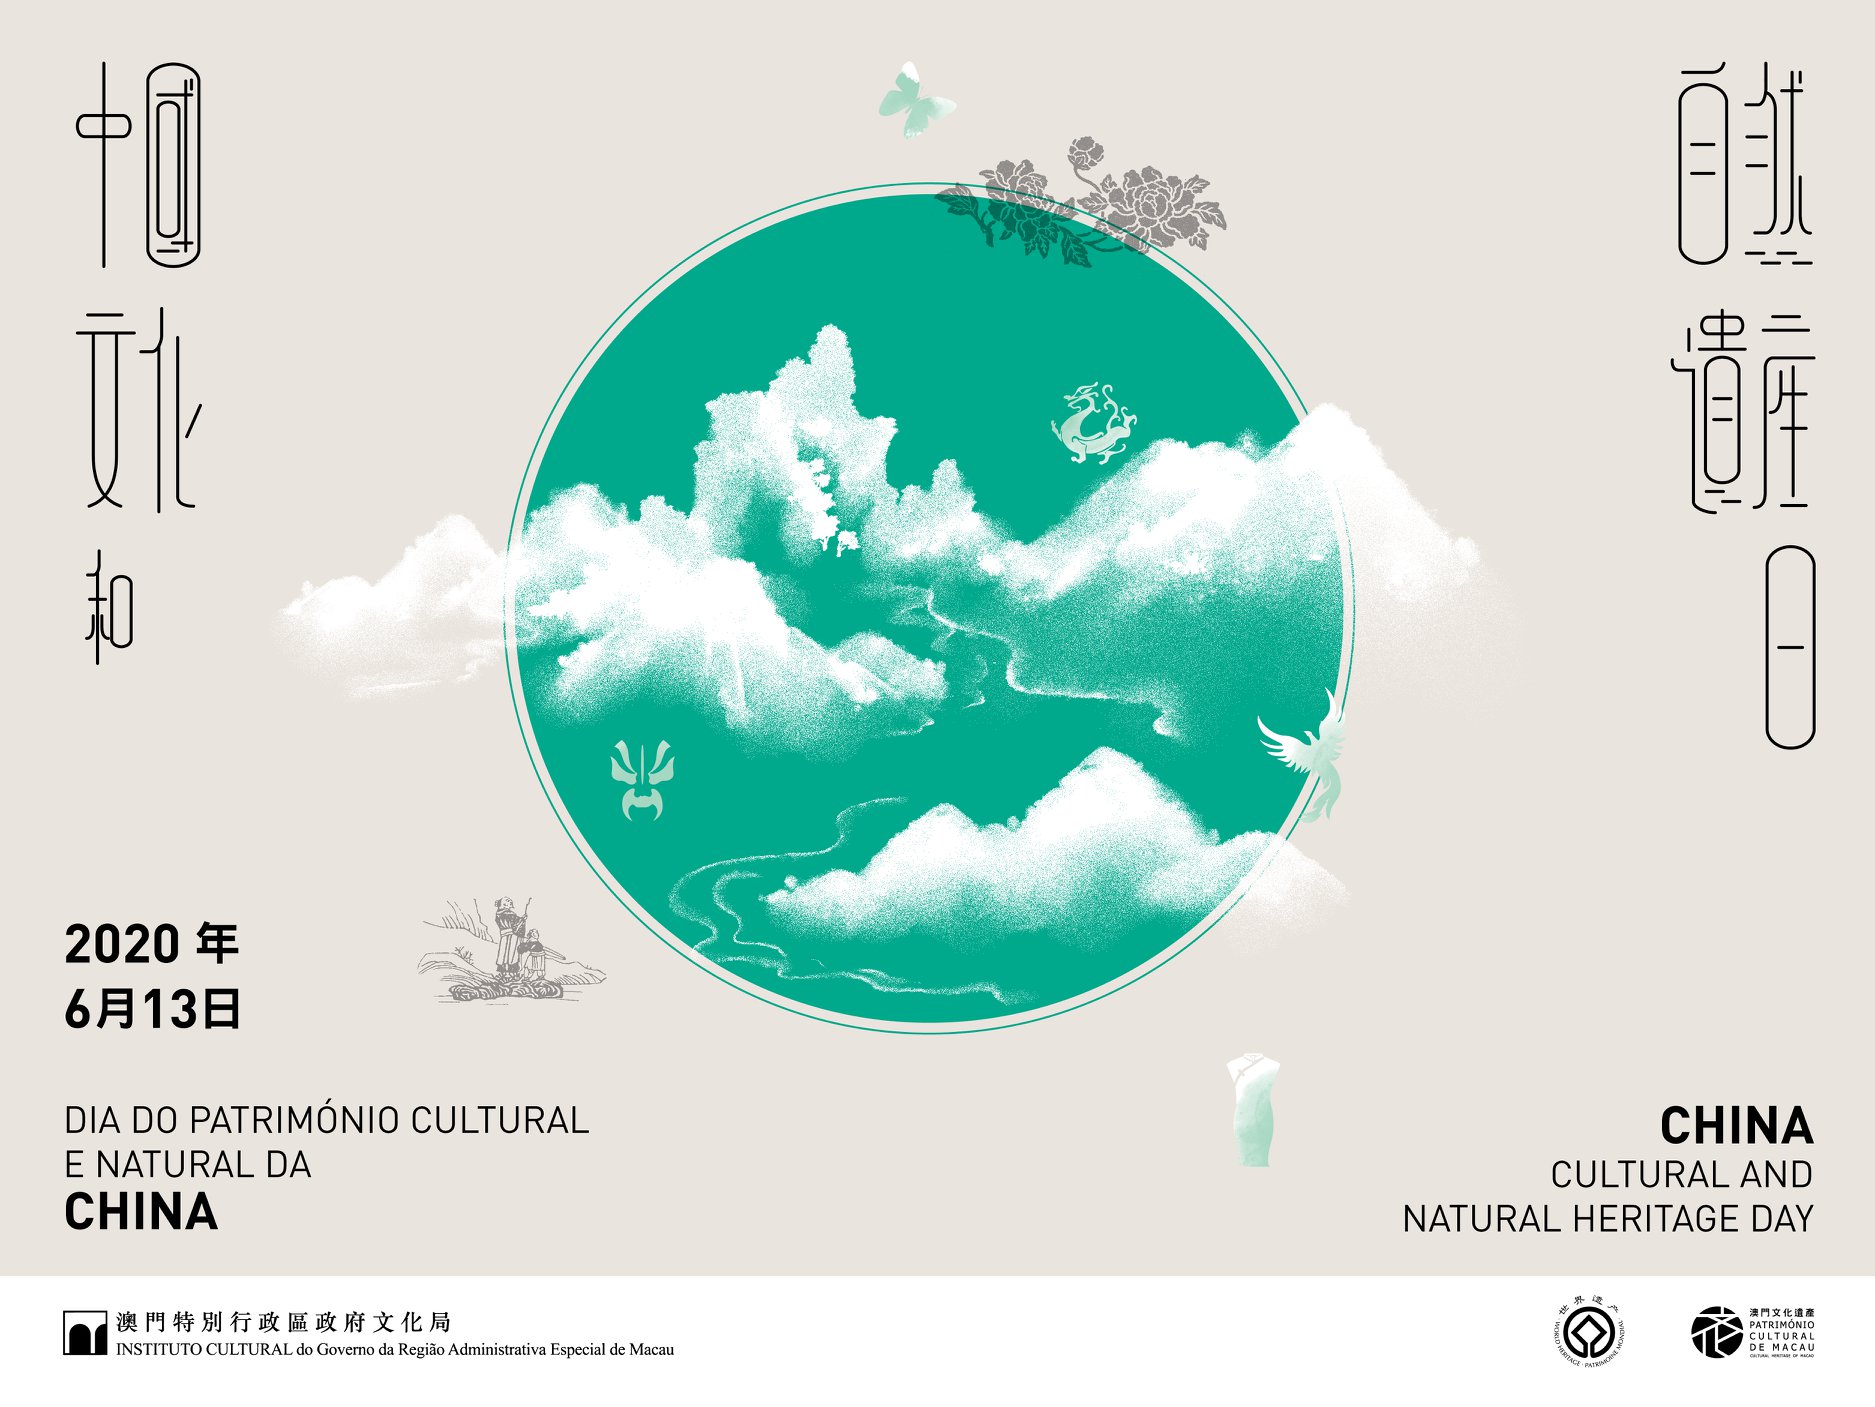 IC launches intangible cultural heritage workshops to mark Cultural & Natural Heritage Day